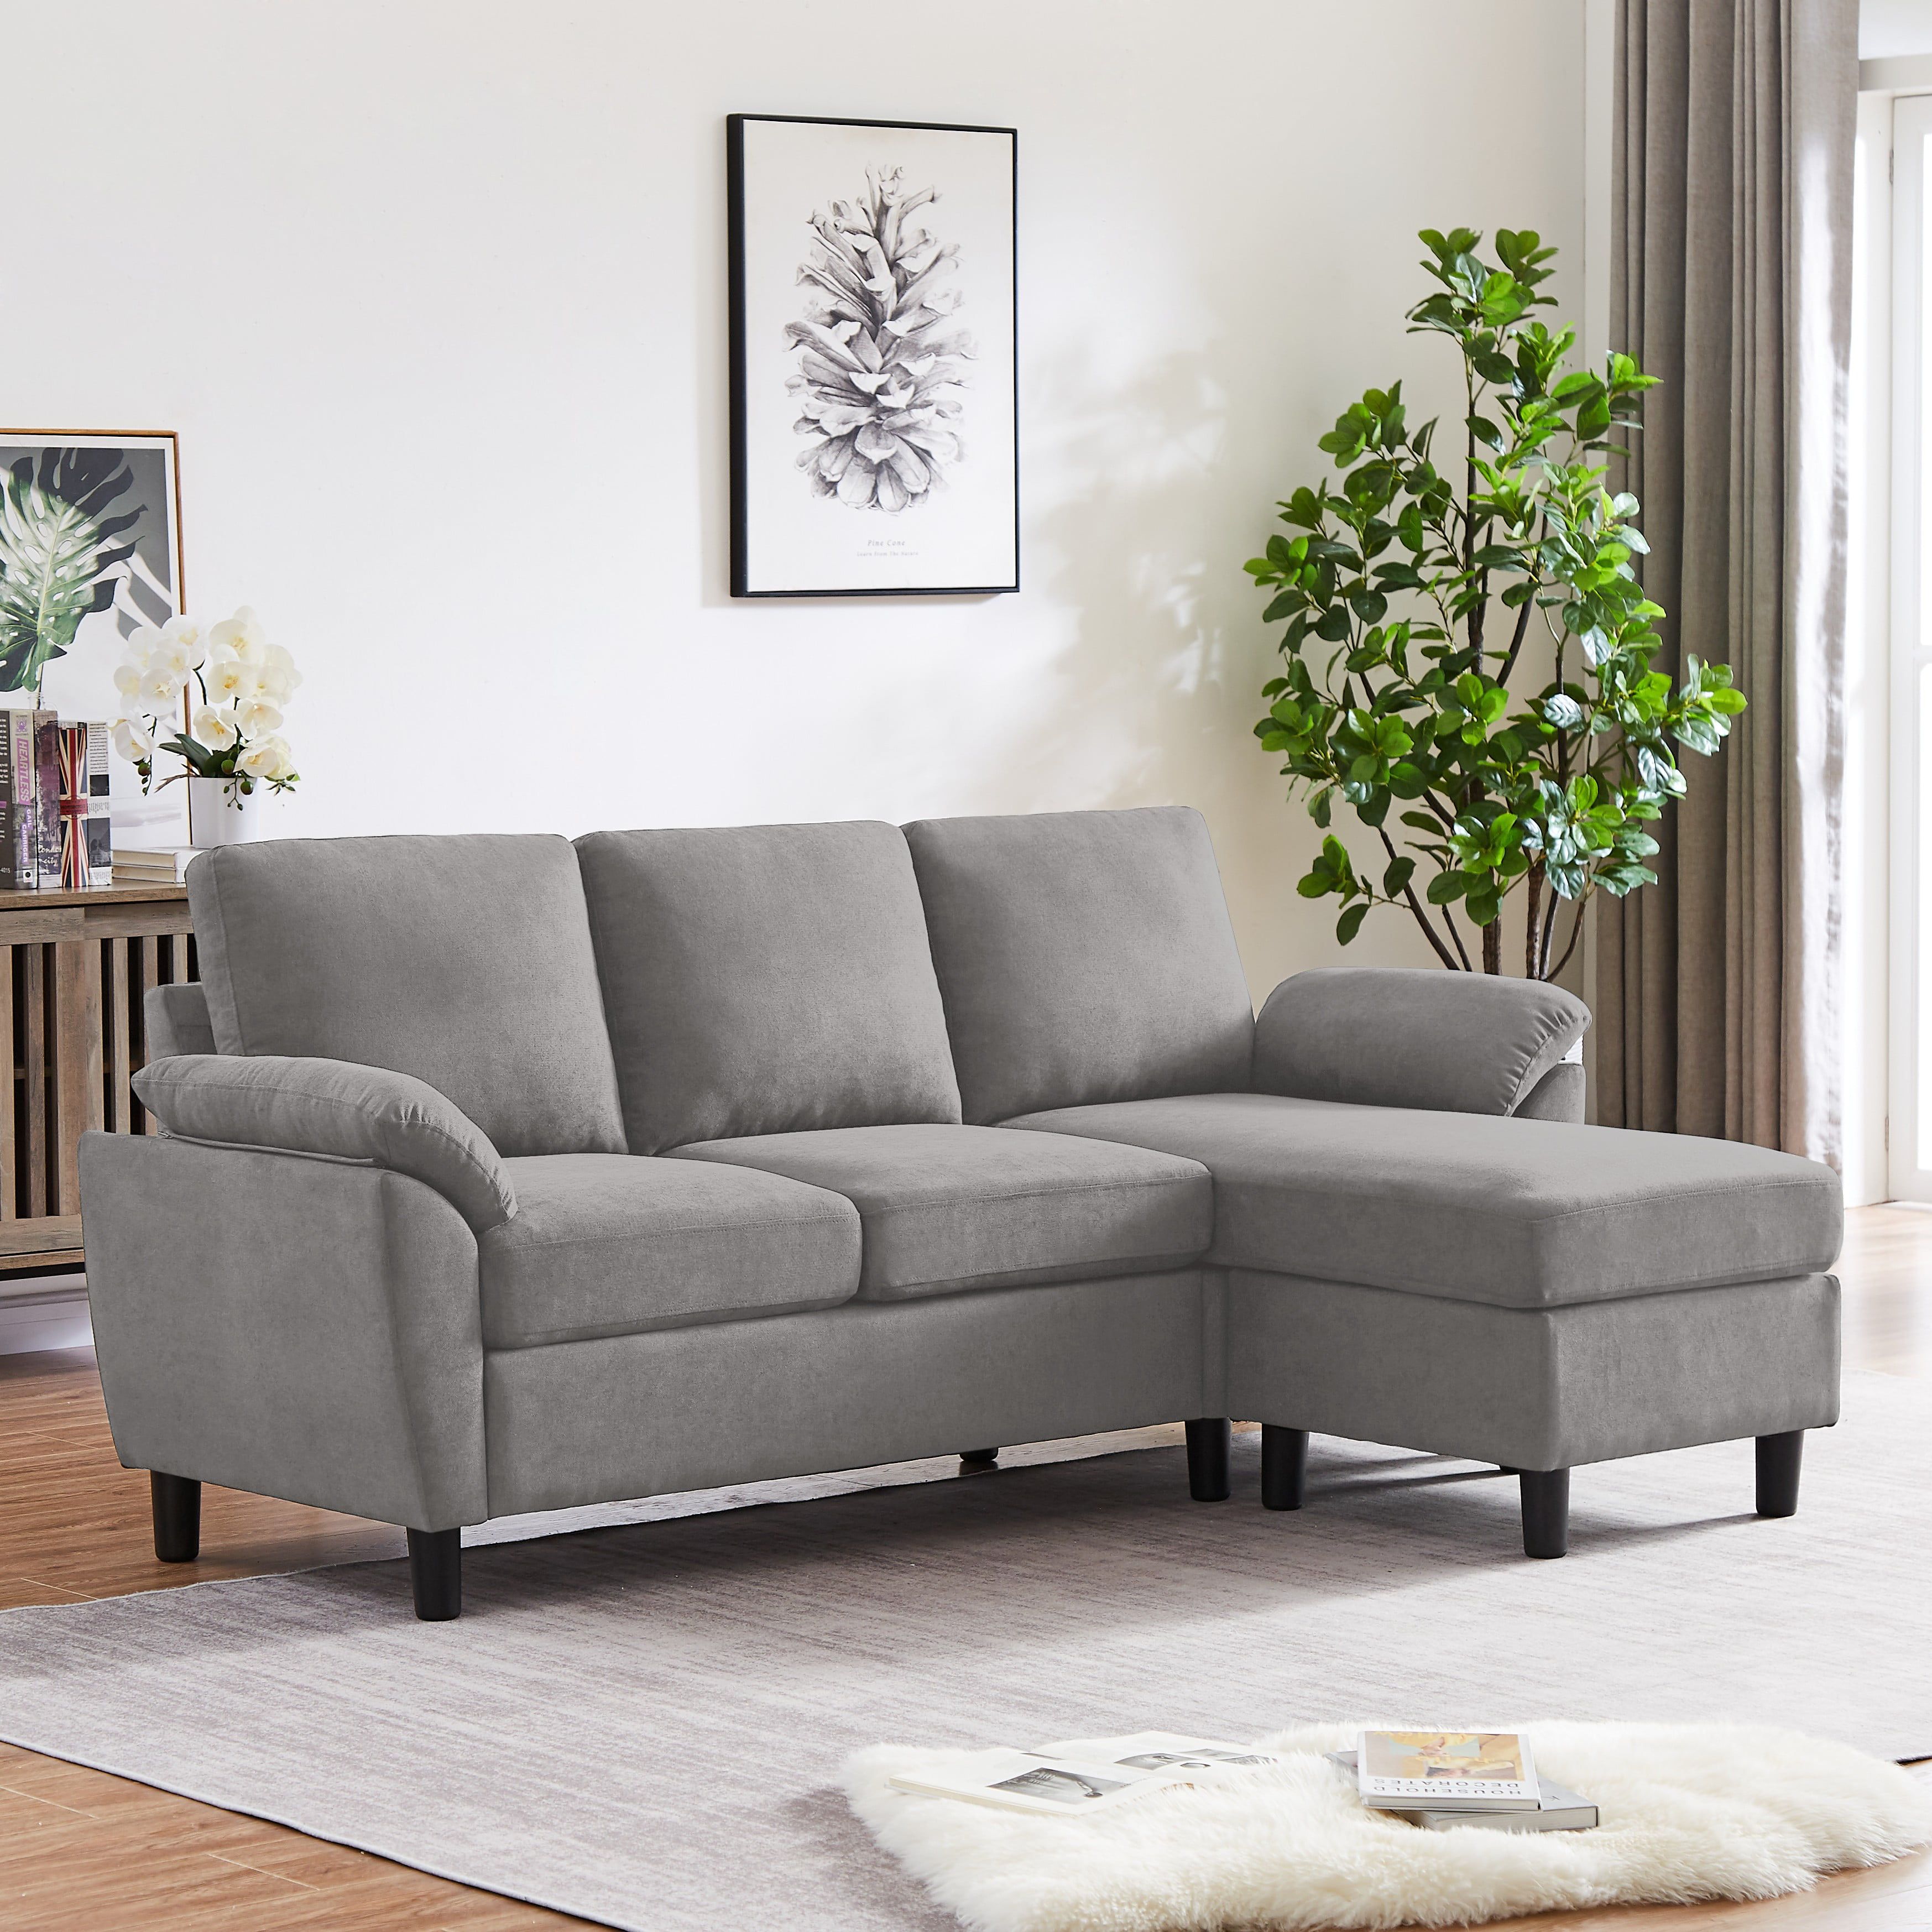 Jarenie Modern Fabric L Shapped Sofa Sectional Couches For Living Room Convertible  Sofa With Matching Chaise For Office, Apartment, Studio – Walmart Pertaining To Convertible Sofas With Matching Chaise (Photo 2 of 15)